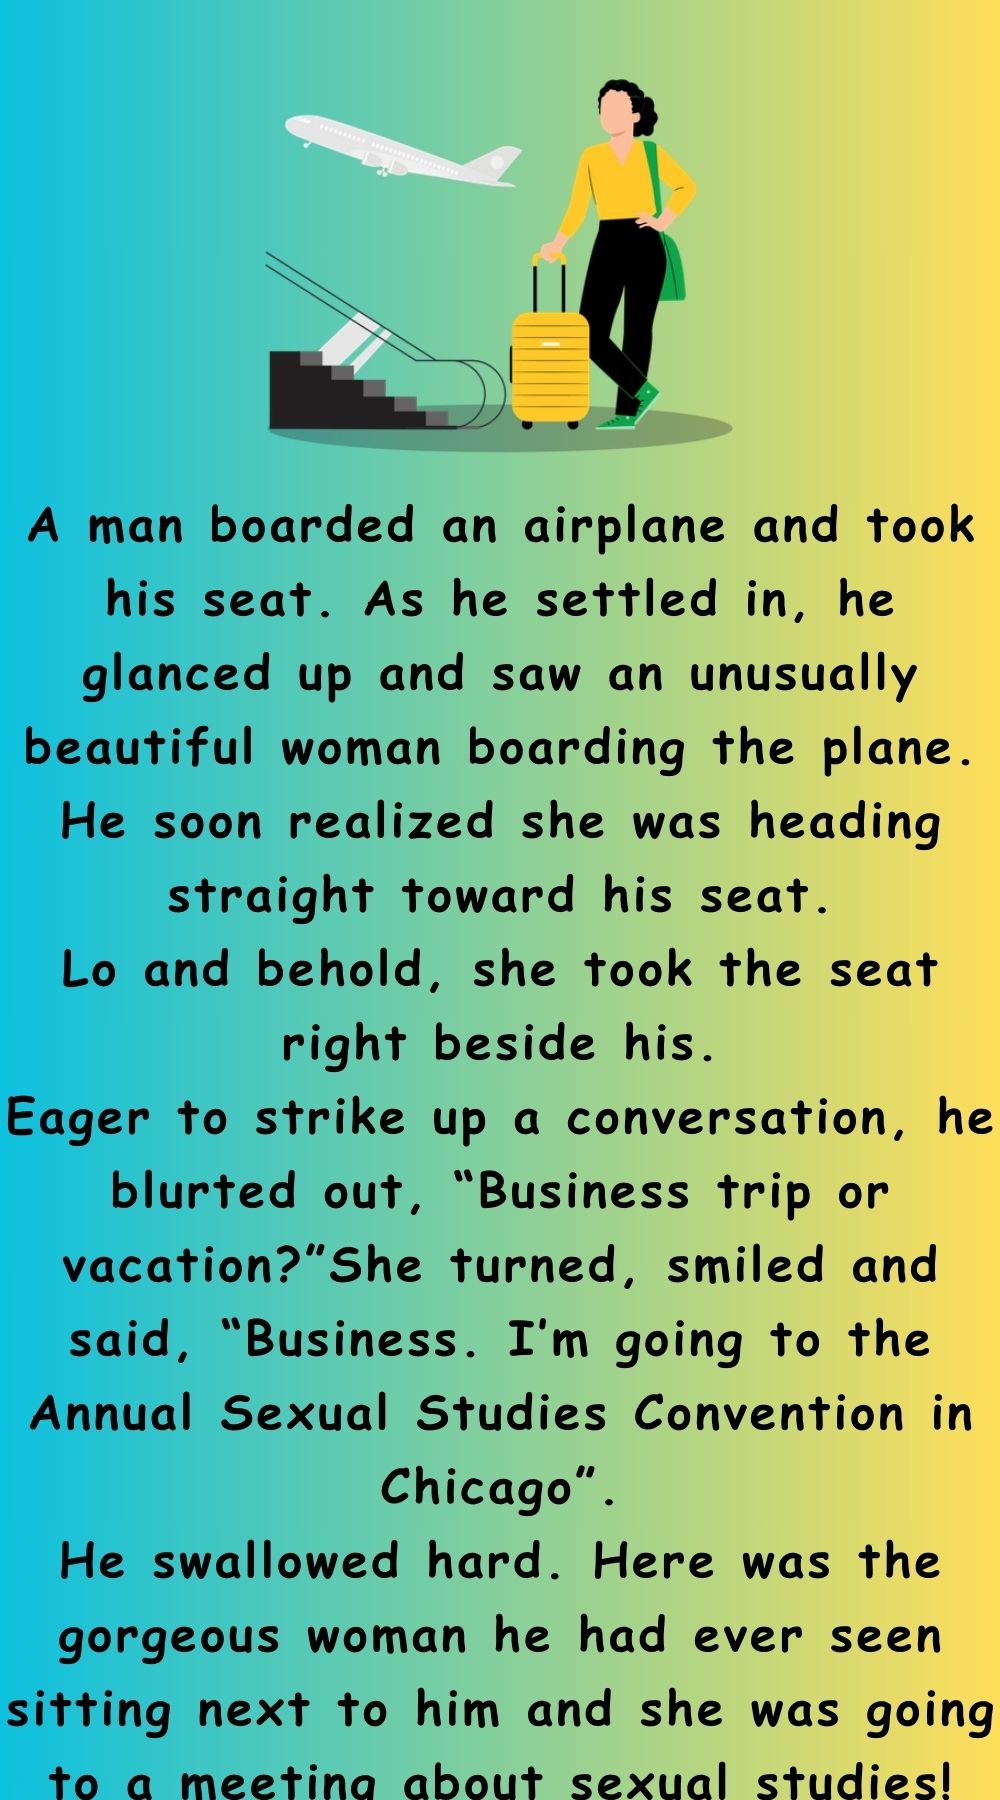 A man boarded an airplane and took his seat